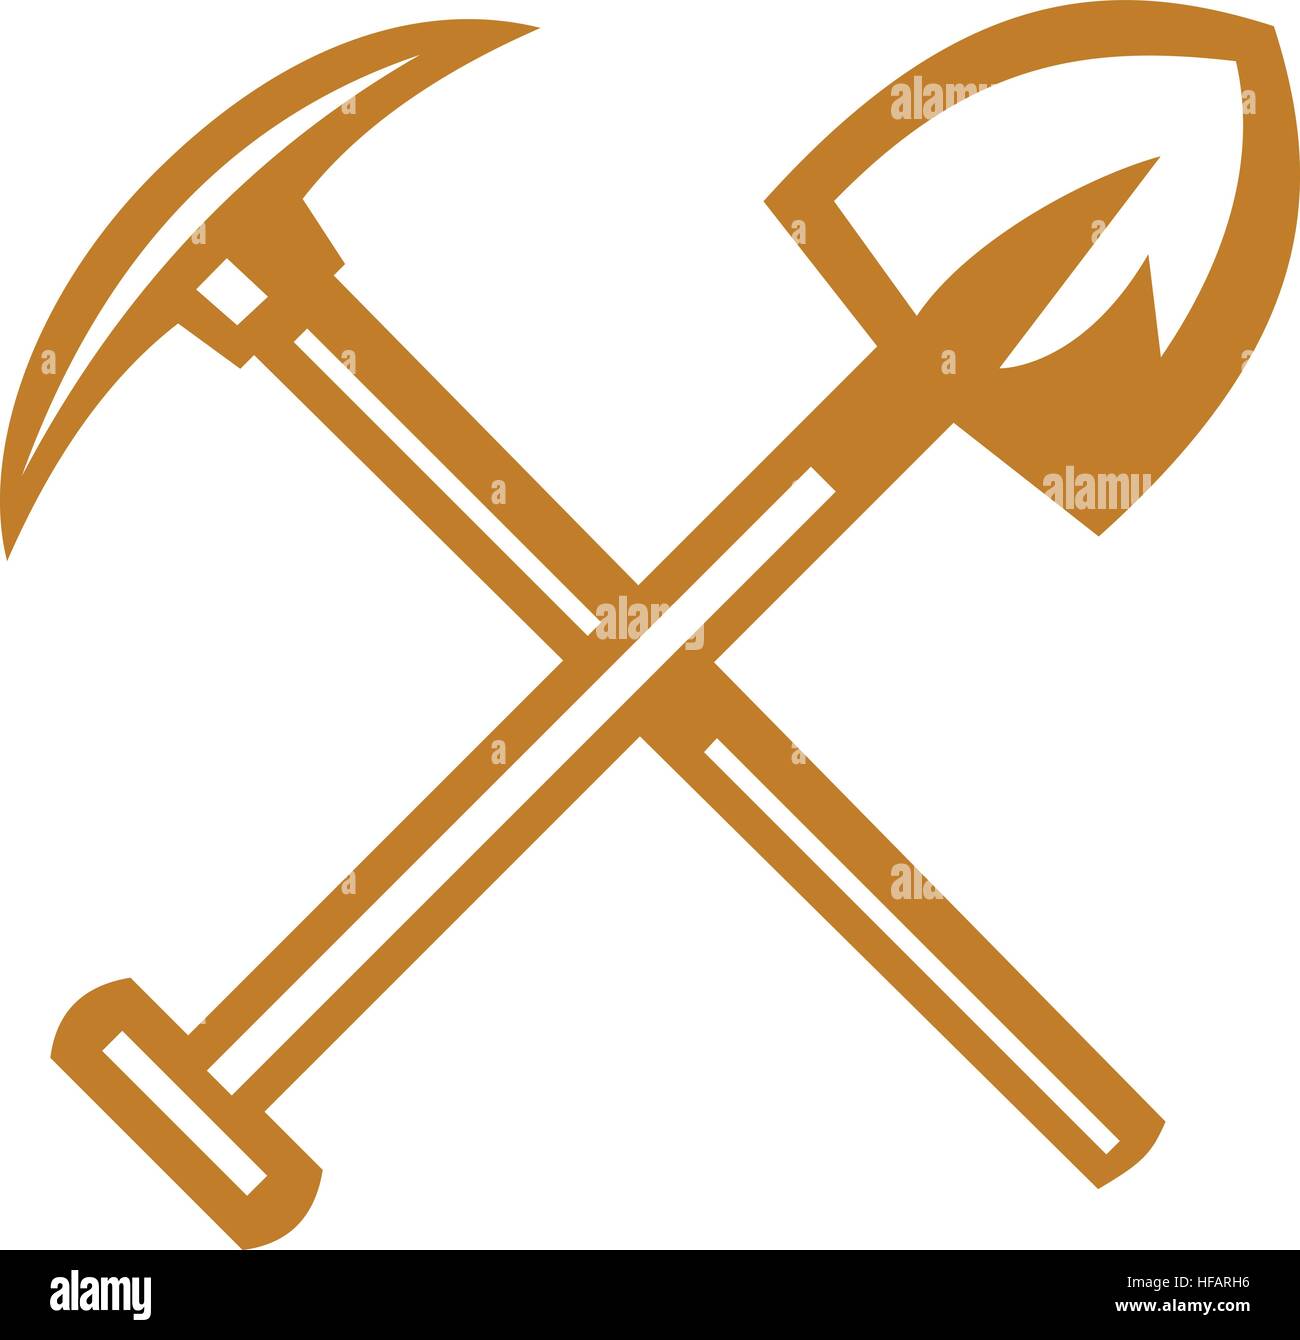 Illustration of a pick axe crossed with shovel viewed from front set on isolated white background done in retro style. Stock Vector